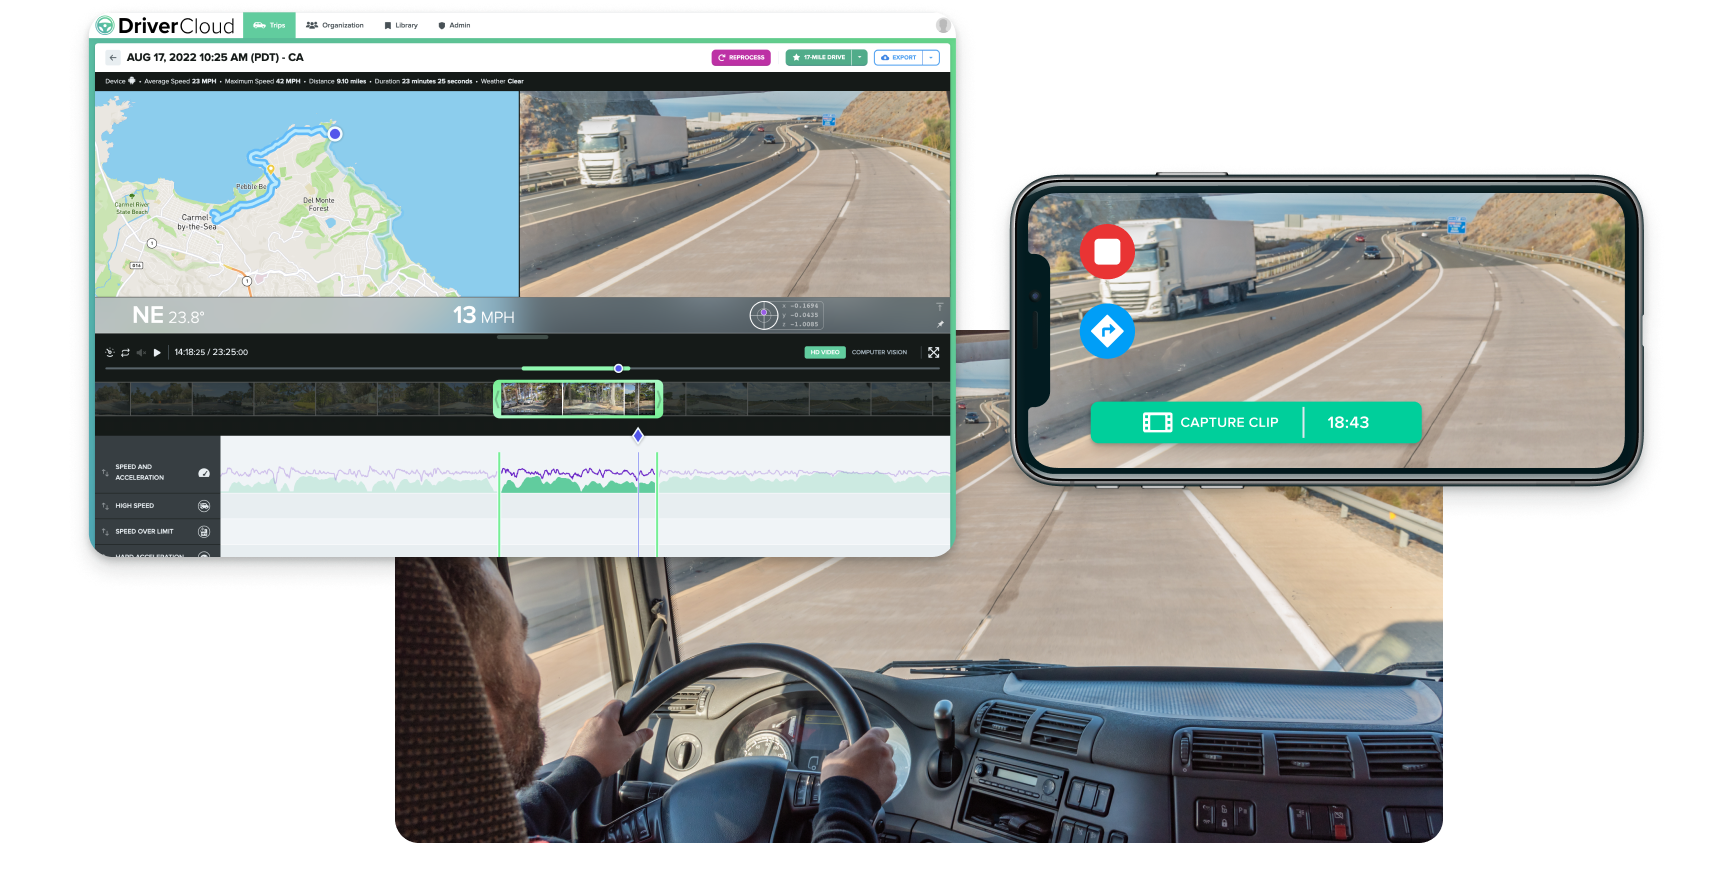 The first fully Cloud-based video solution for commercial vehicles.